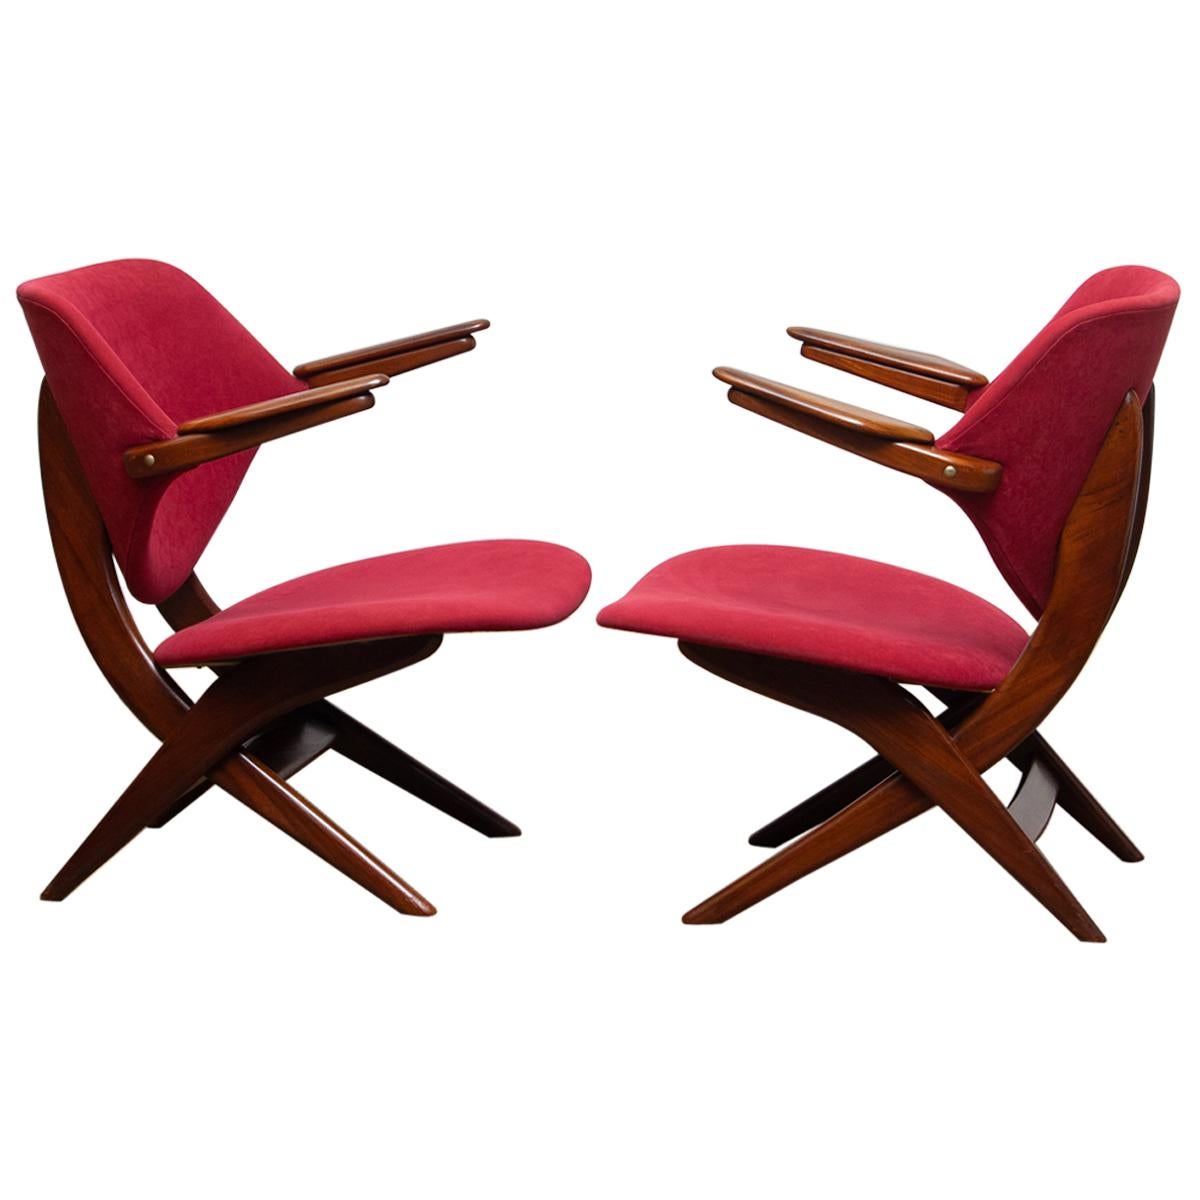 Fabric 1950s, Set of Two Teak Lounge/Easy Chairs by Louis Van Teeffelen for Wébé